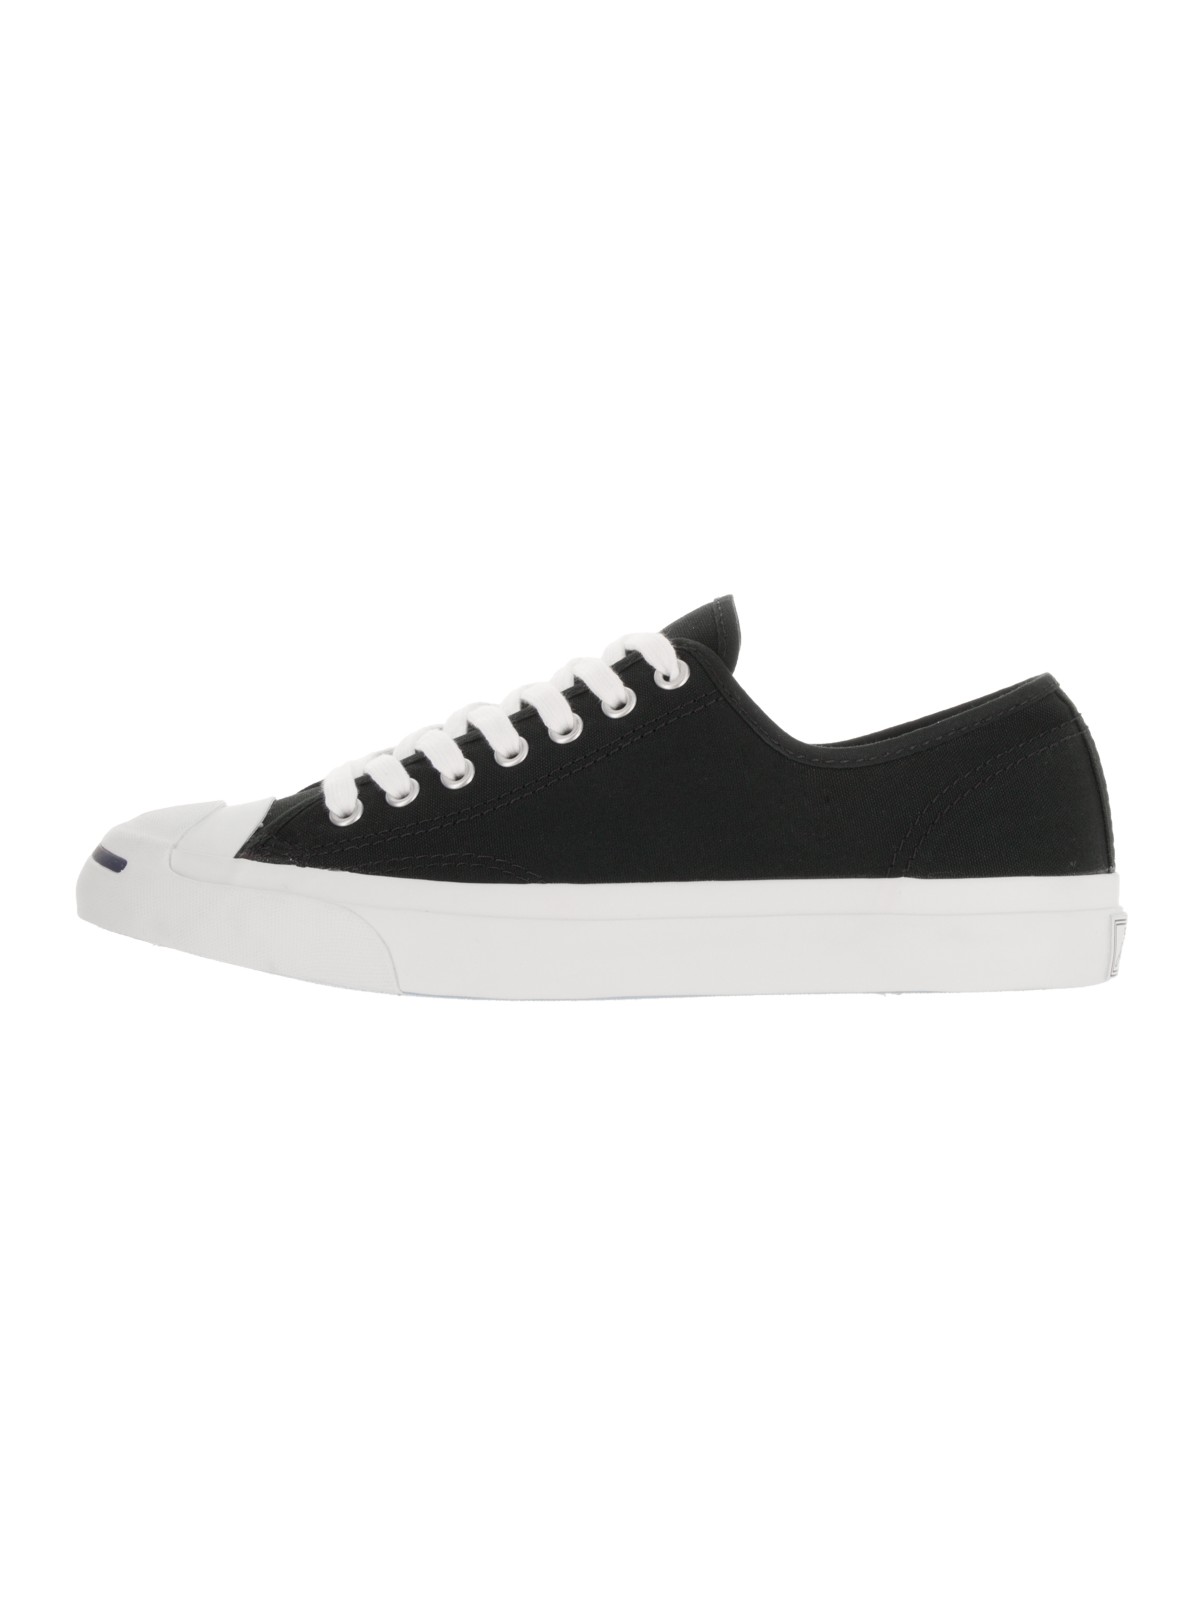 Converse Jack Purcell Jack Ox Canvas Sneaker - image 3 of 5